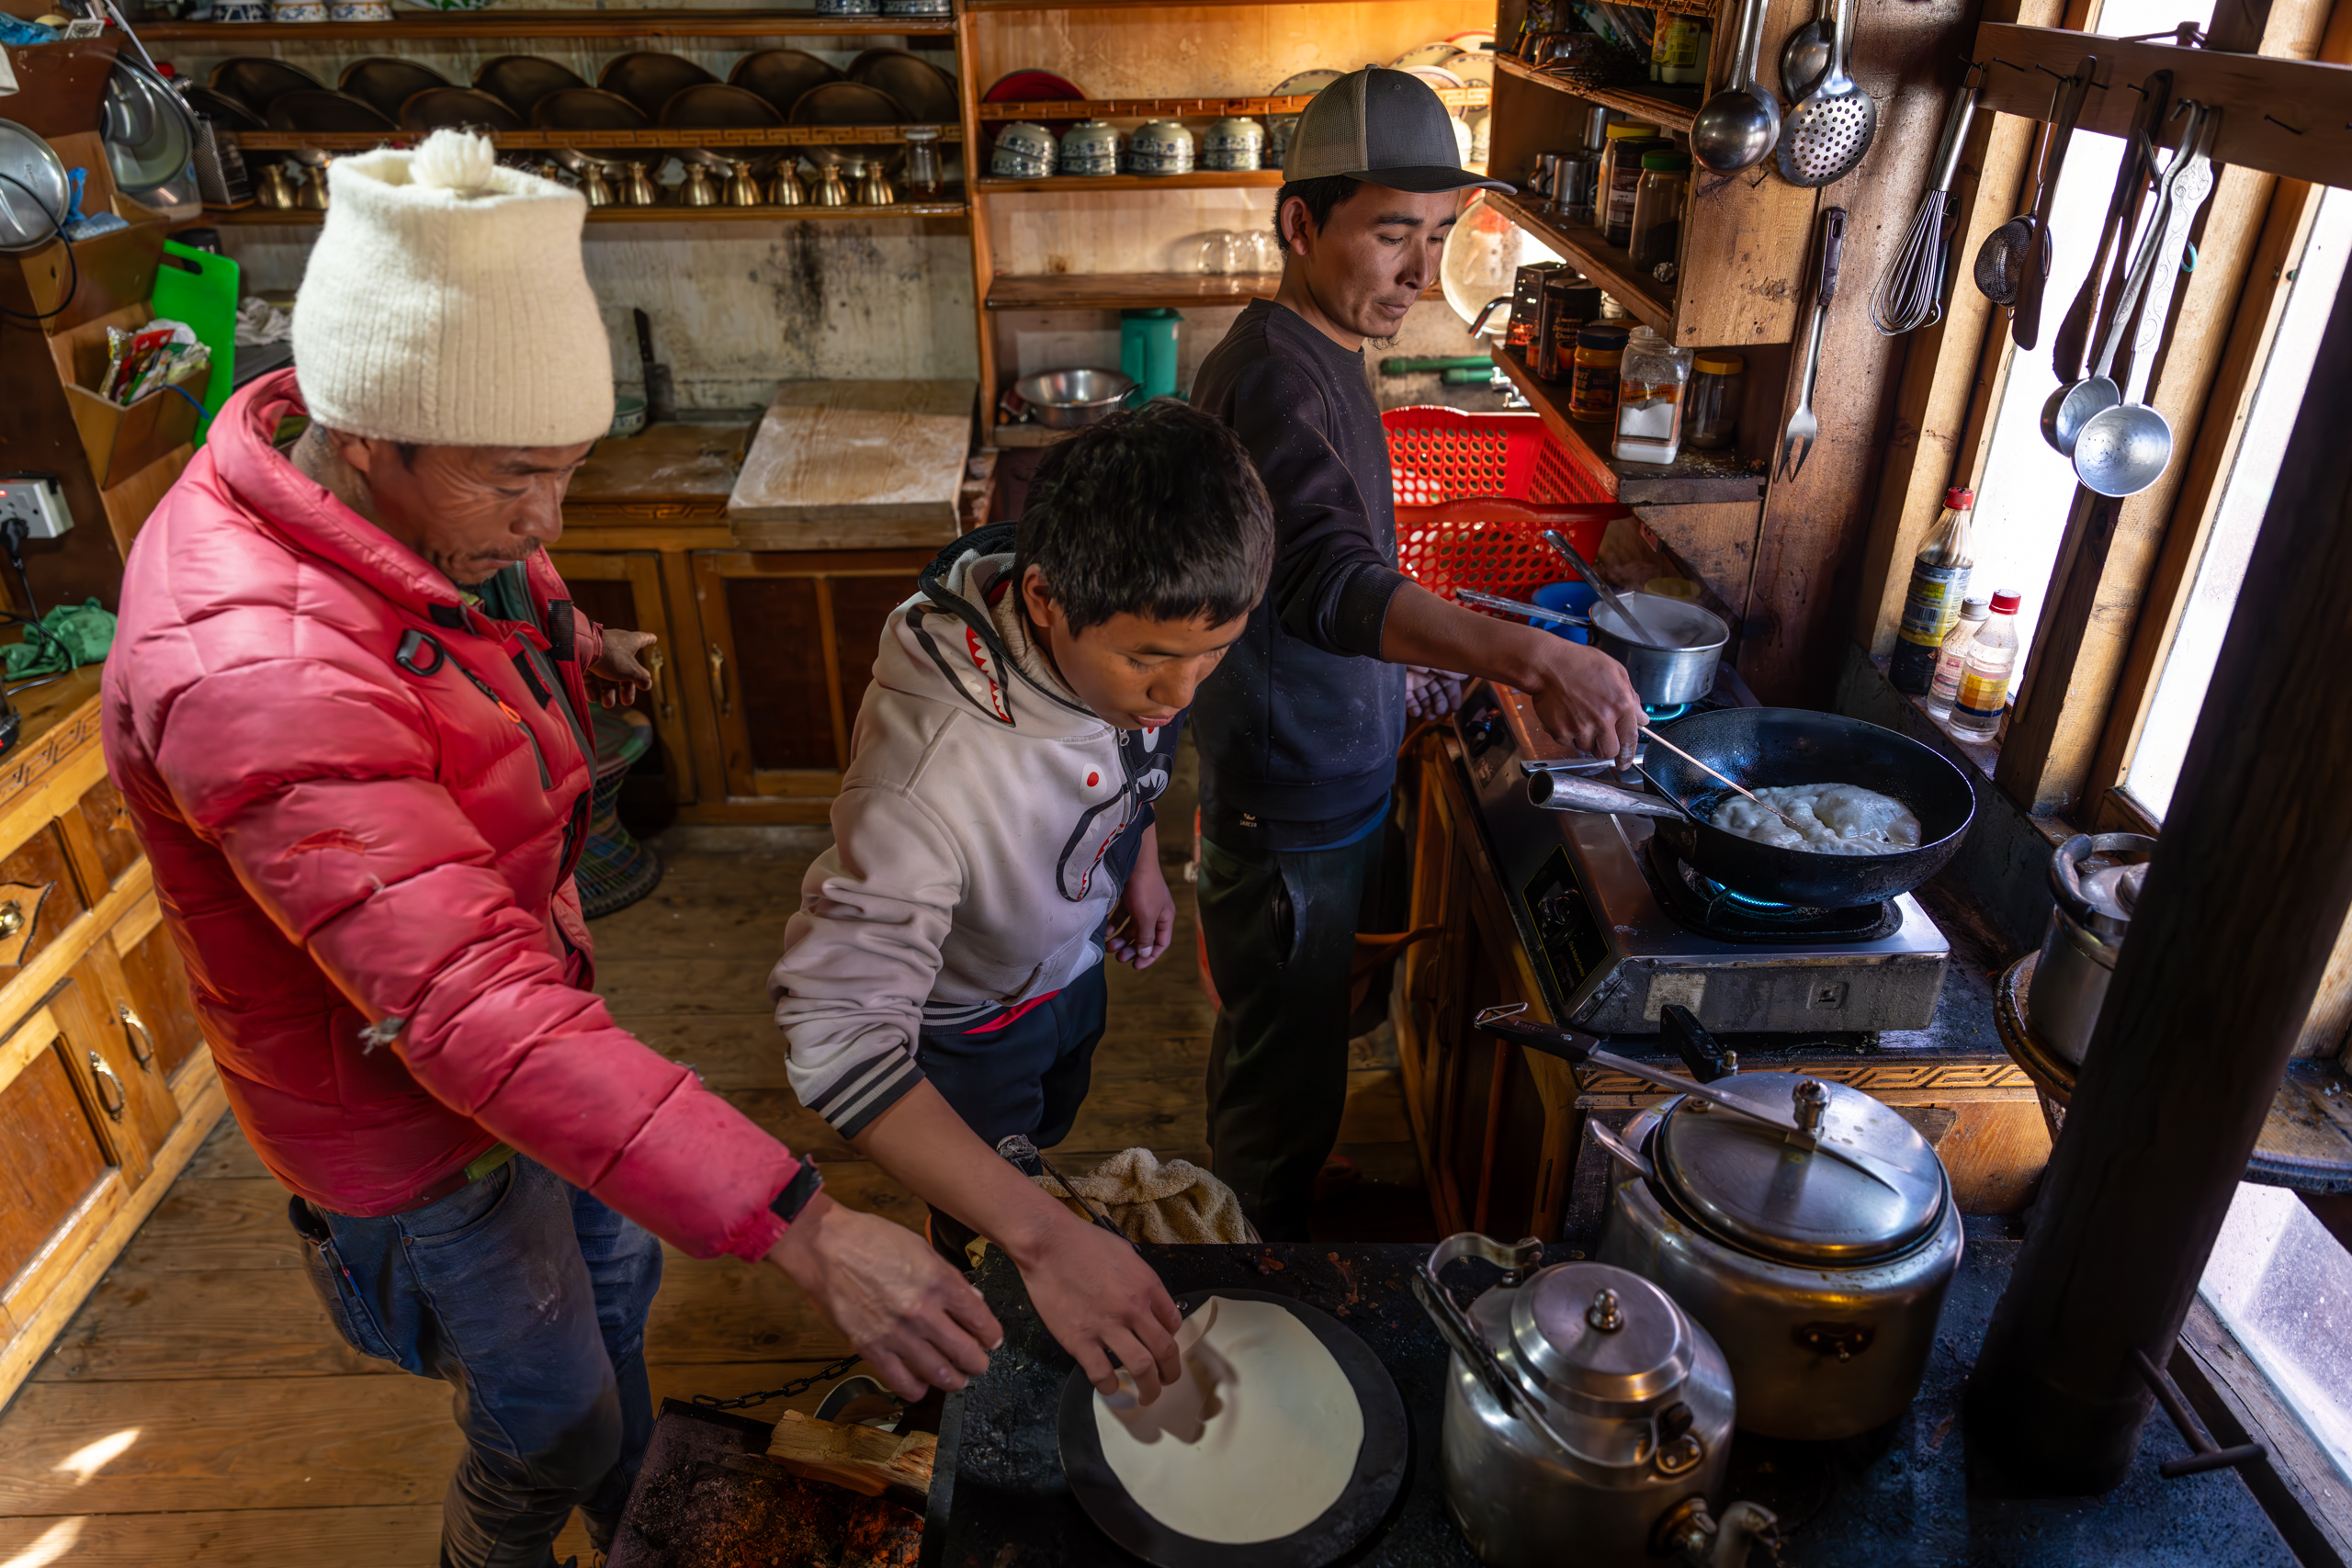 3 generations cooking in a teahouse kitchen in nepal